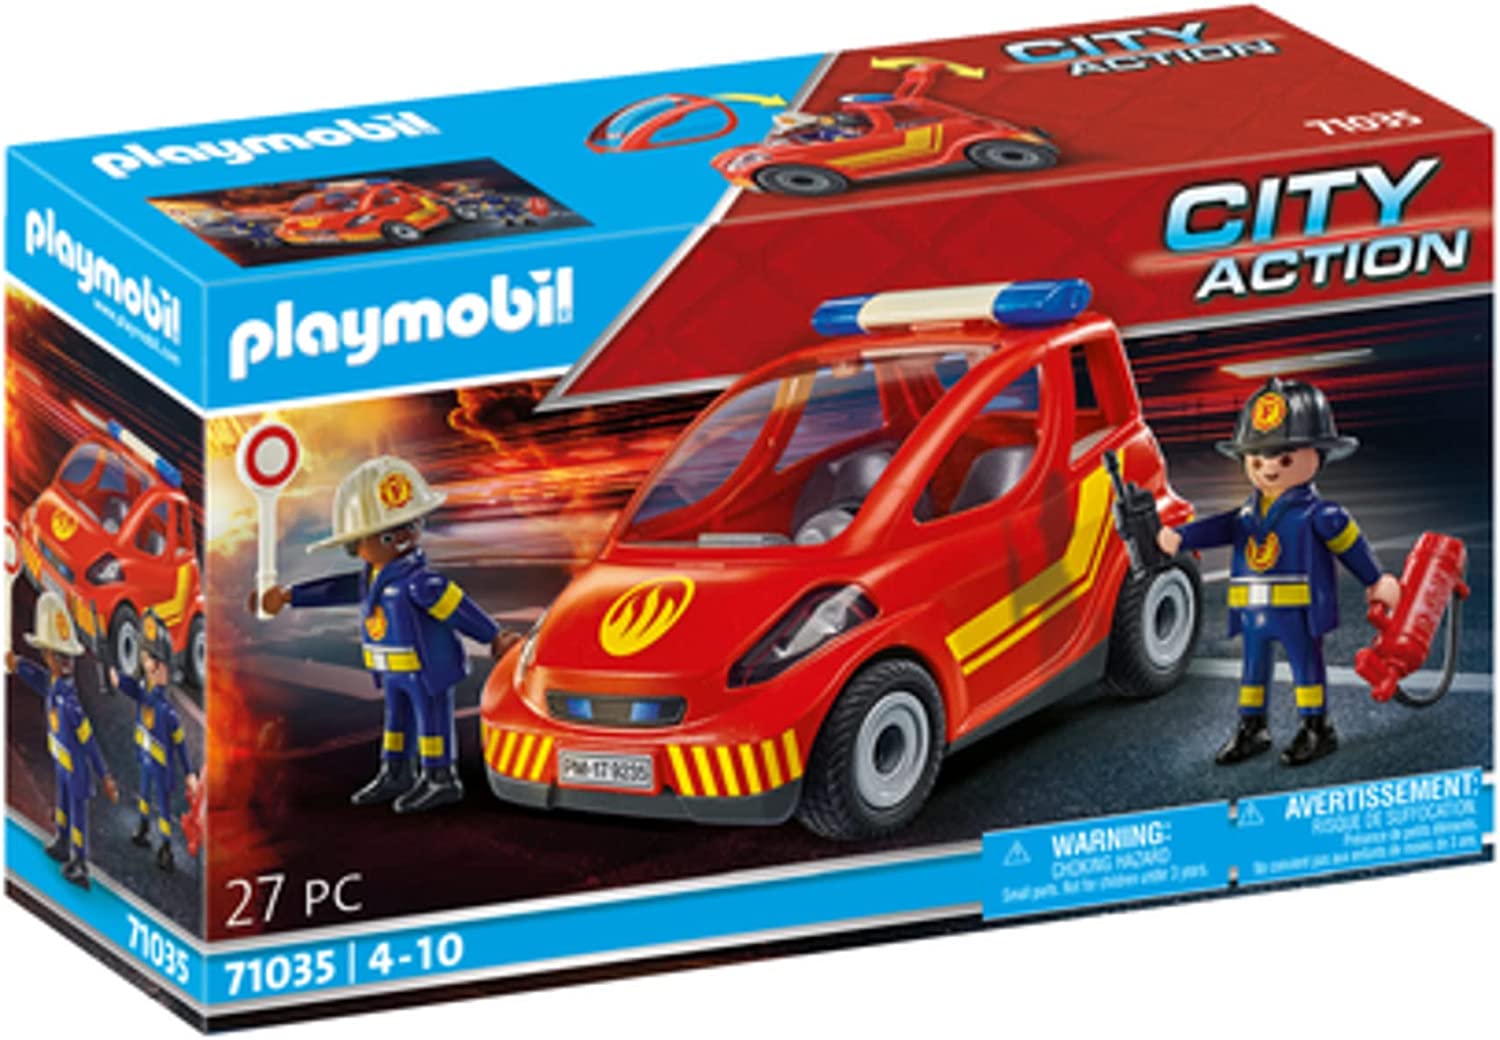 PLAYMOBIL City Action 71035 Fire Brigade Small Car, Recommended for Ages 4 Years and Above